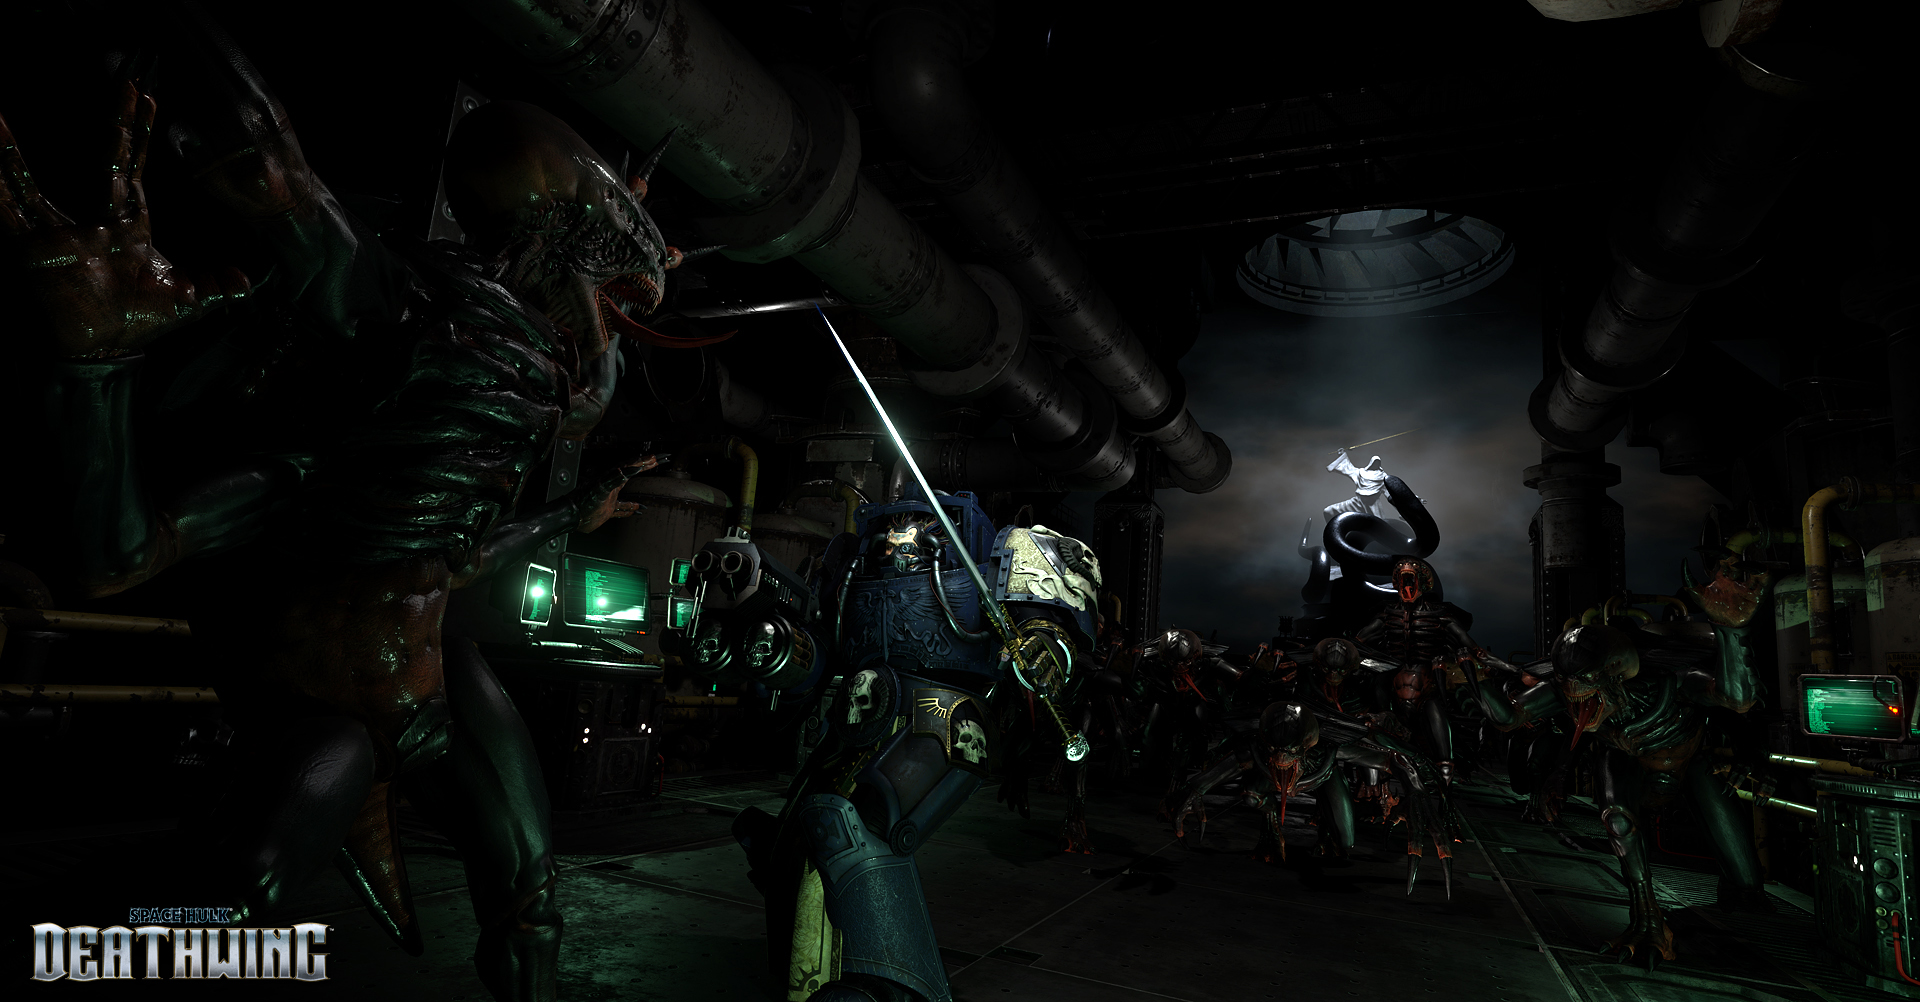 Media asset in full size related to 3dfxzone.it news item entitled as follows: 17 minuti di gameplay in single-player dello shooterSpace Hulk: Deathwing | Image Name: news25285_Space-Hulk-Deathwing-Screenshot_3.jpg